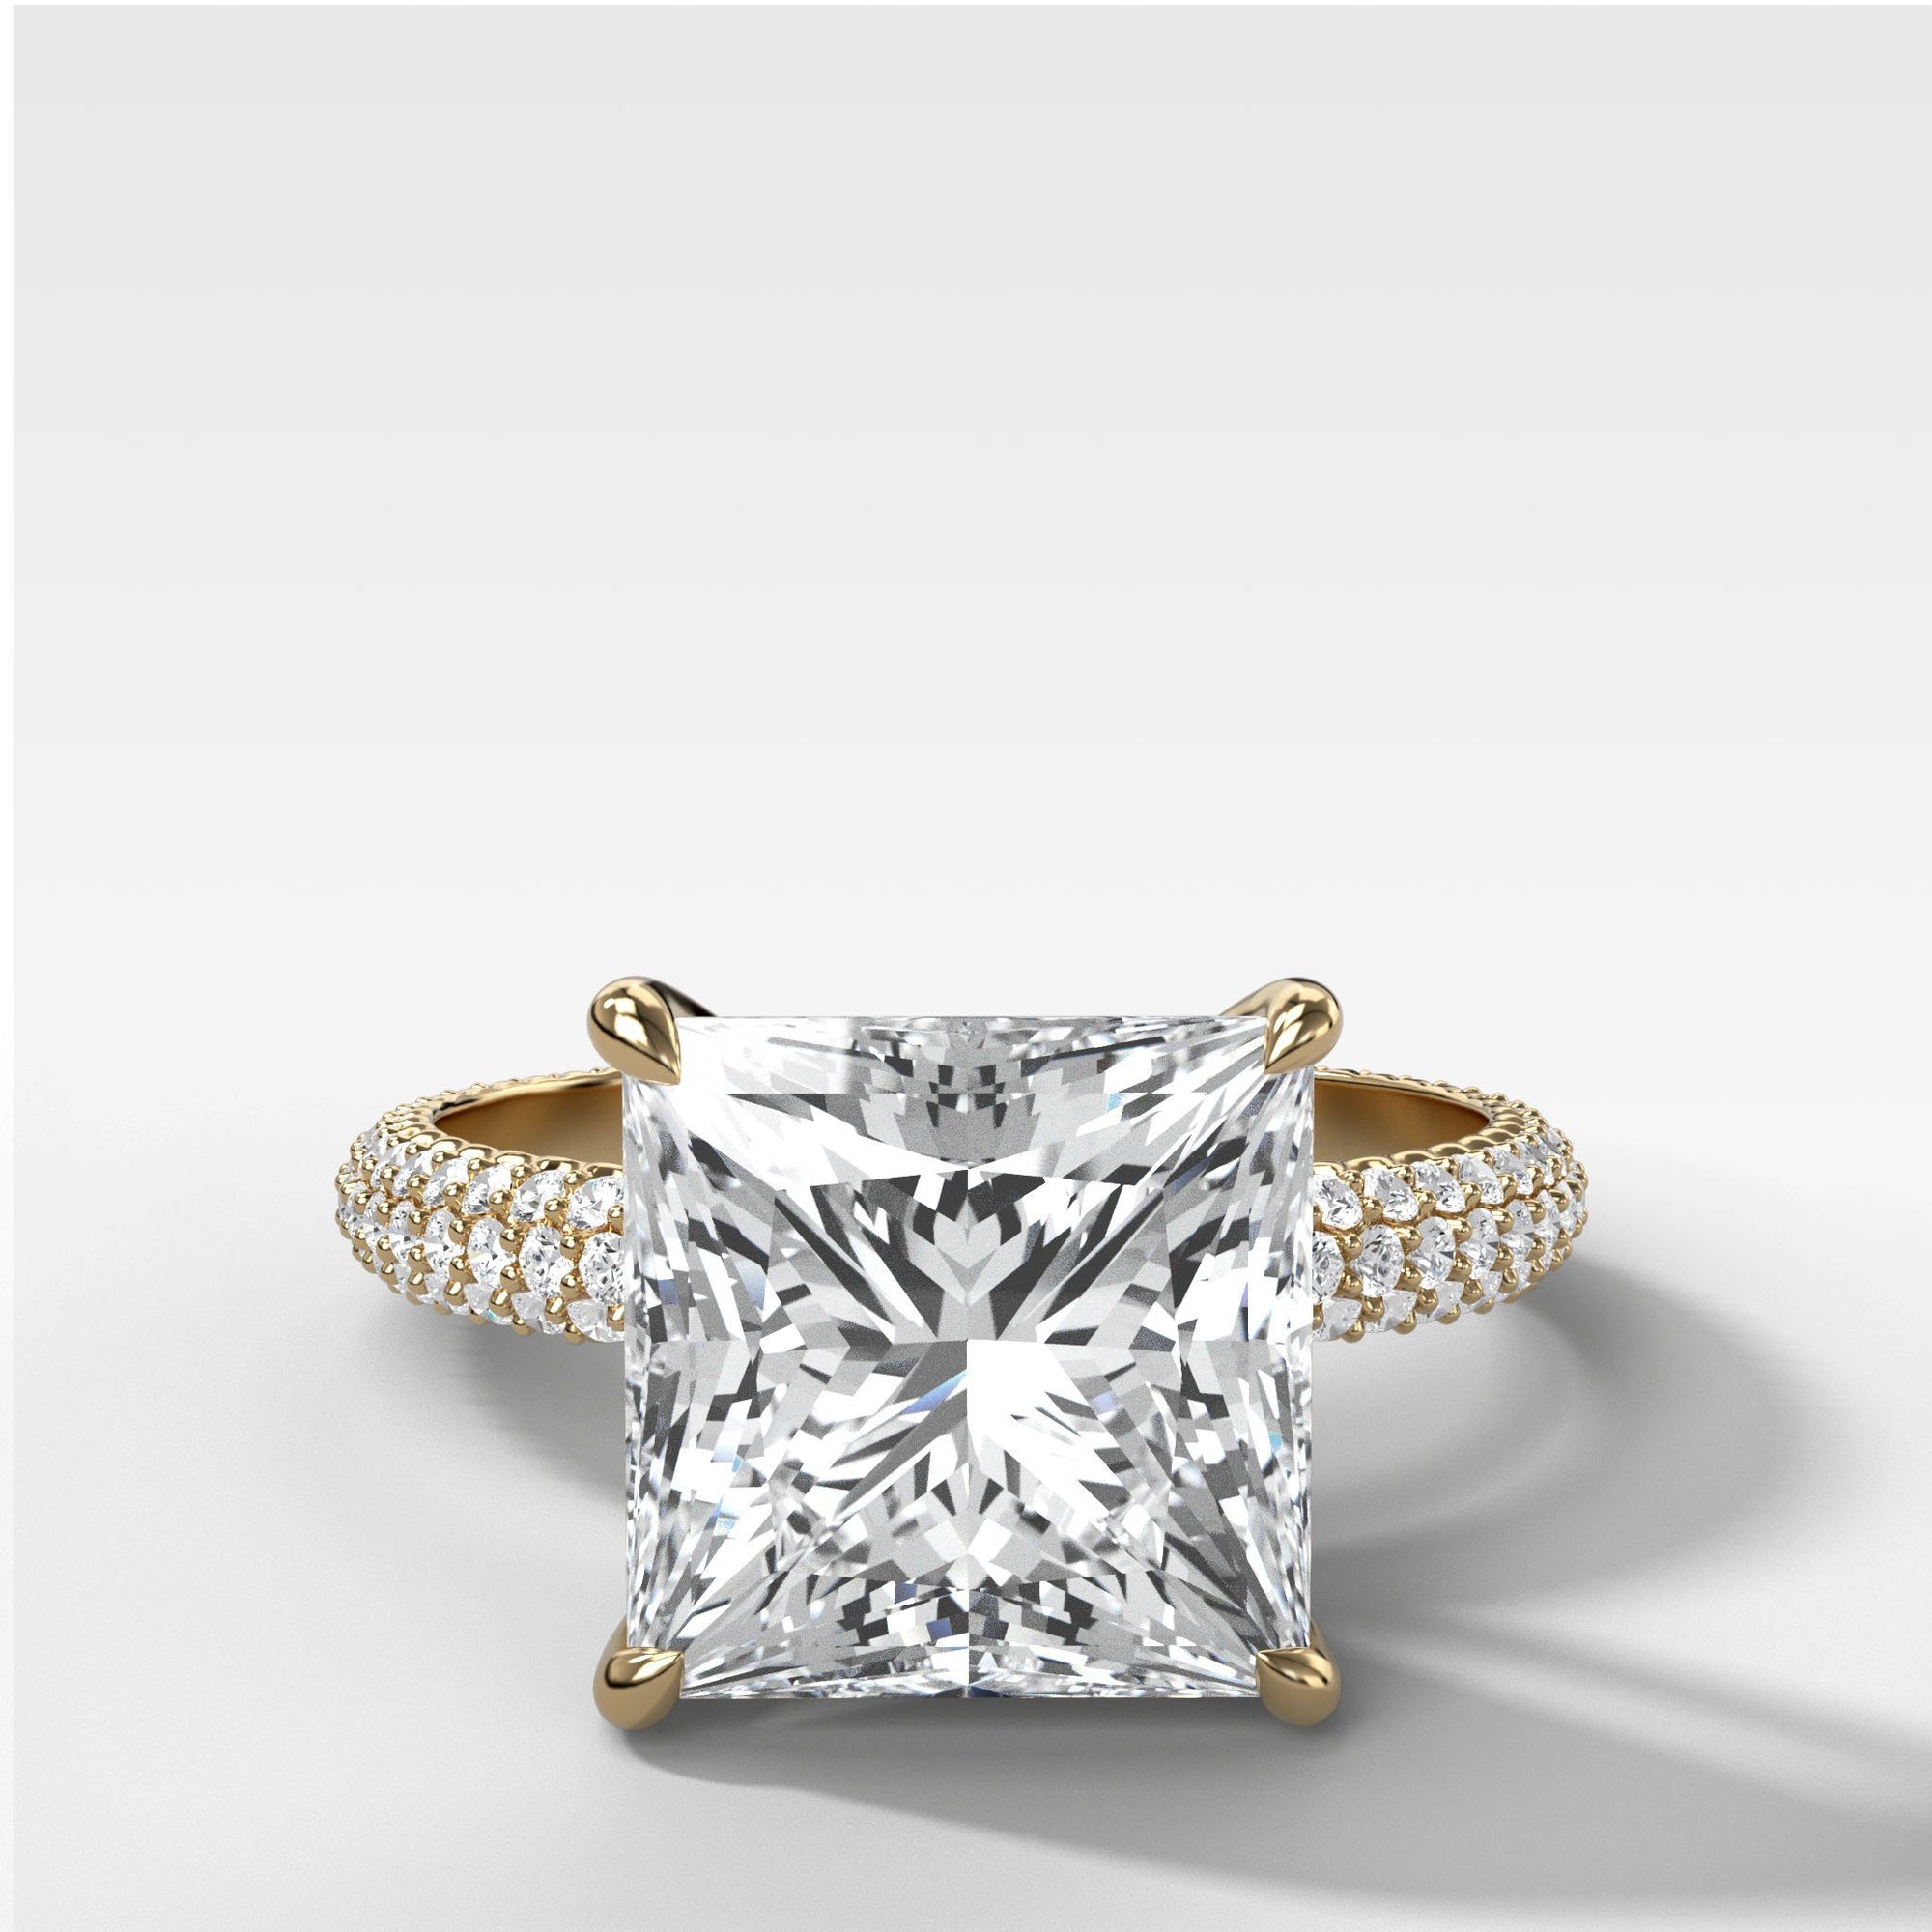 Triple Row Pavé Engagement Ring With Princess Cut by Good Stone in Yellow Gold